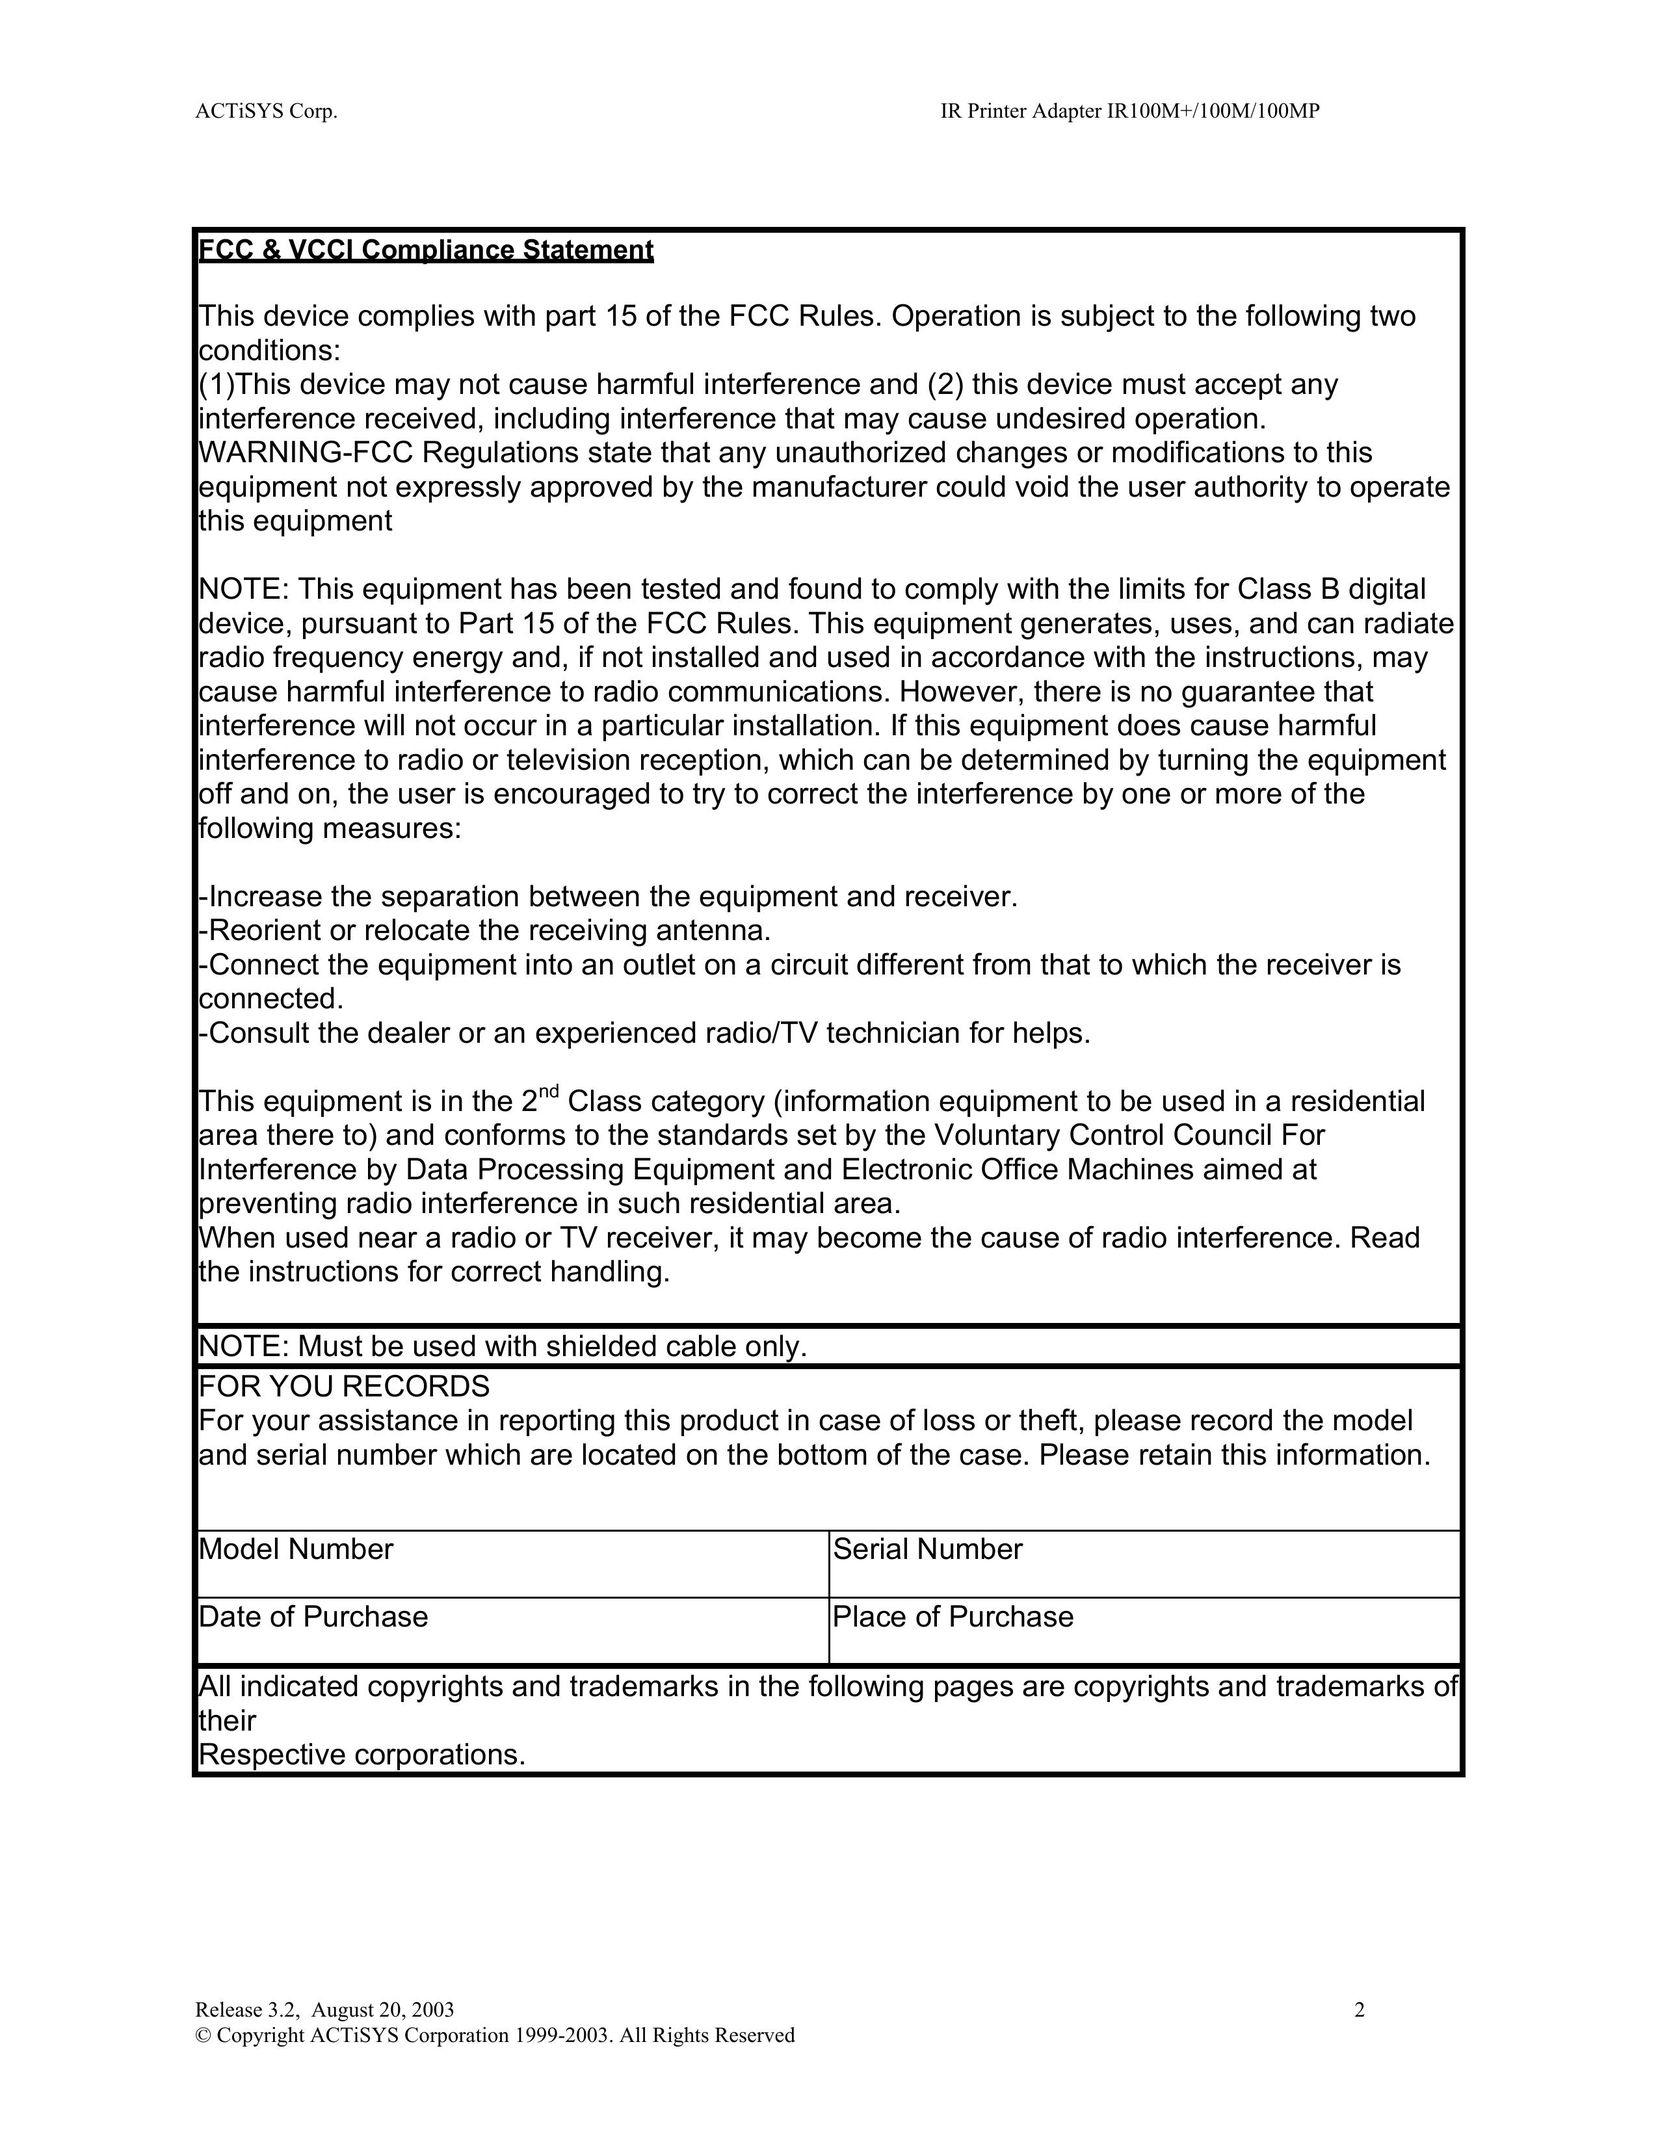 ACTiSYS ACT-IR100M Network Card User Manual (Page 2)